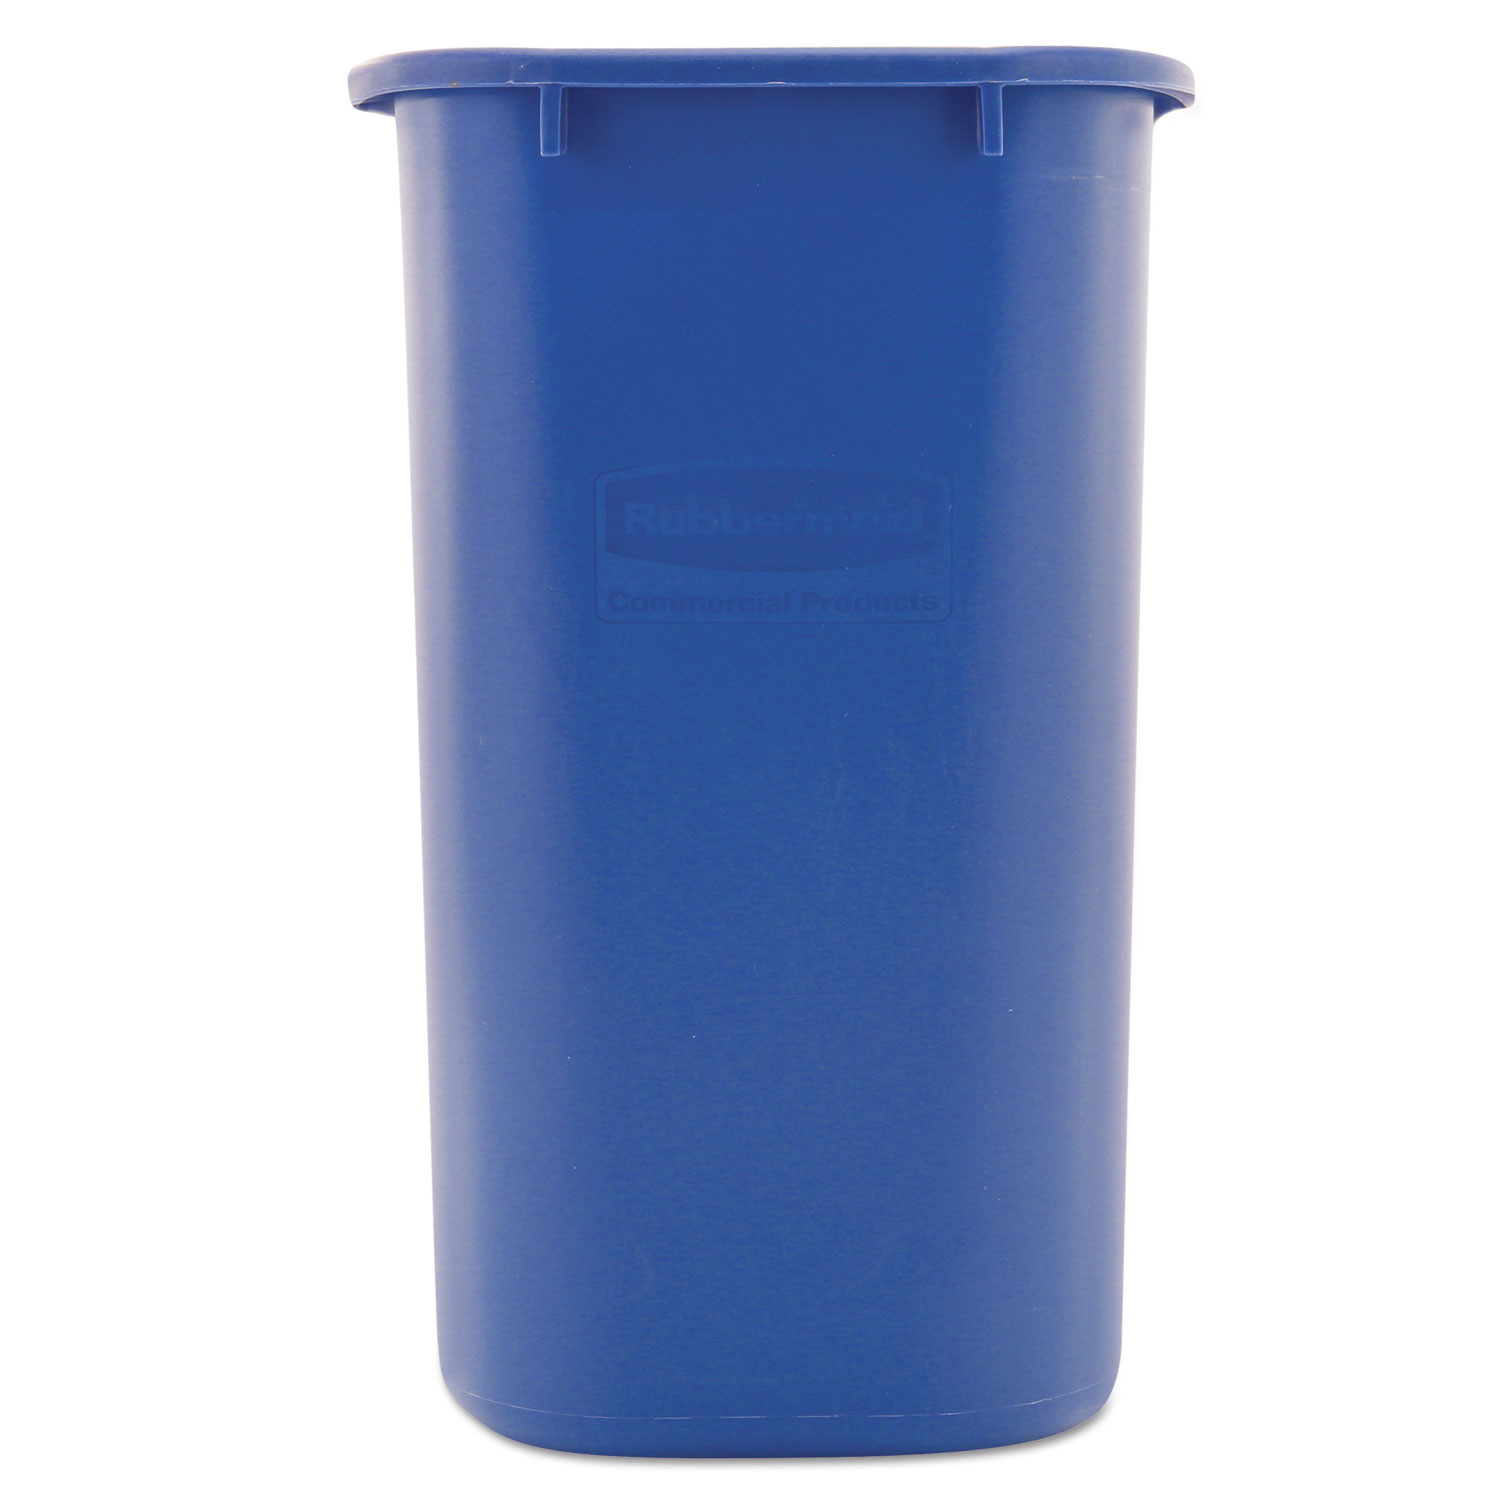 Rubbermaid Deskside 7 Gallon Recycling Can RCP295673BE Blue 